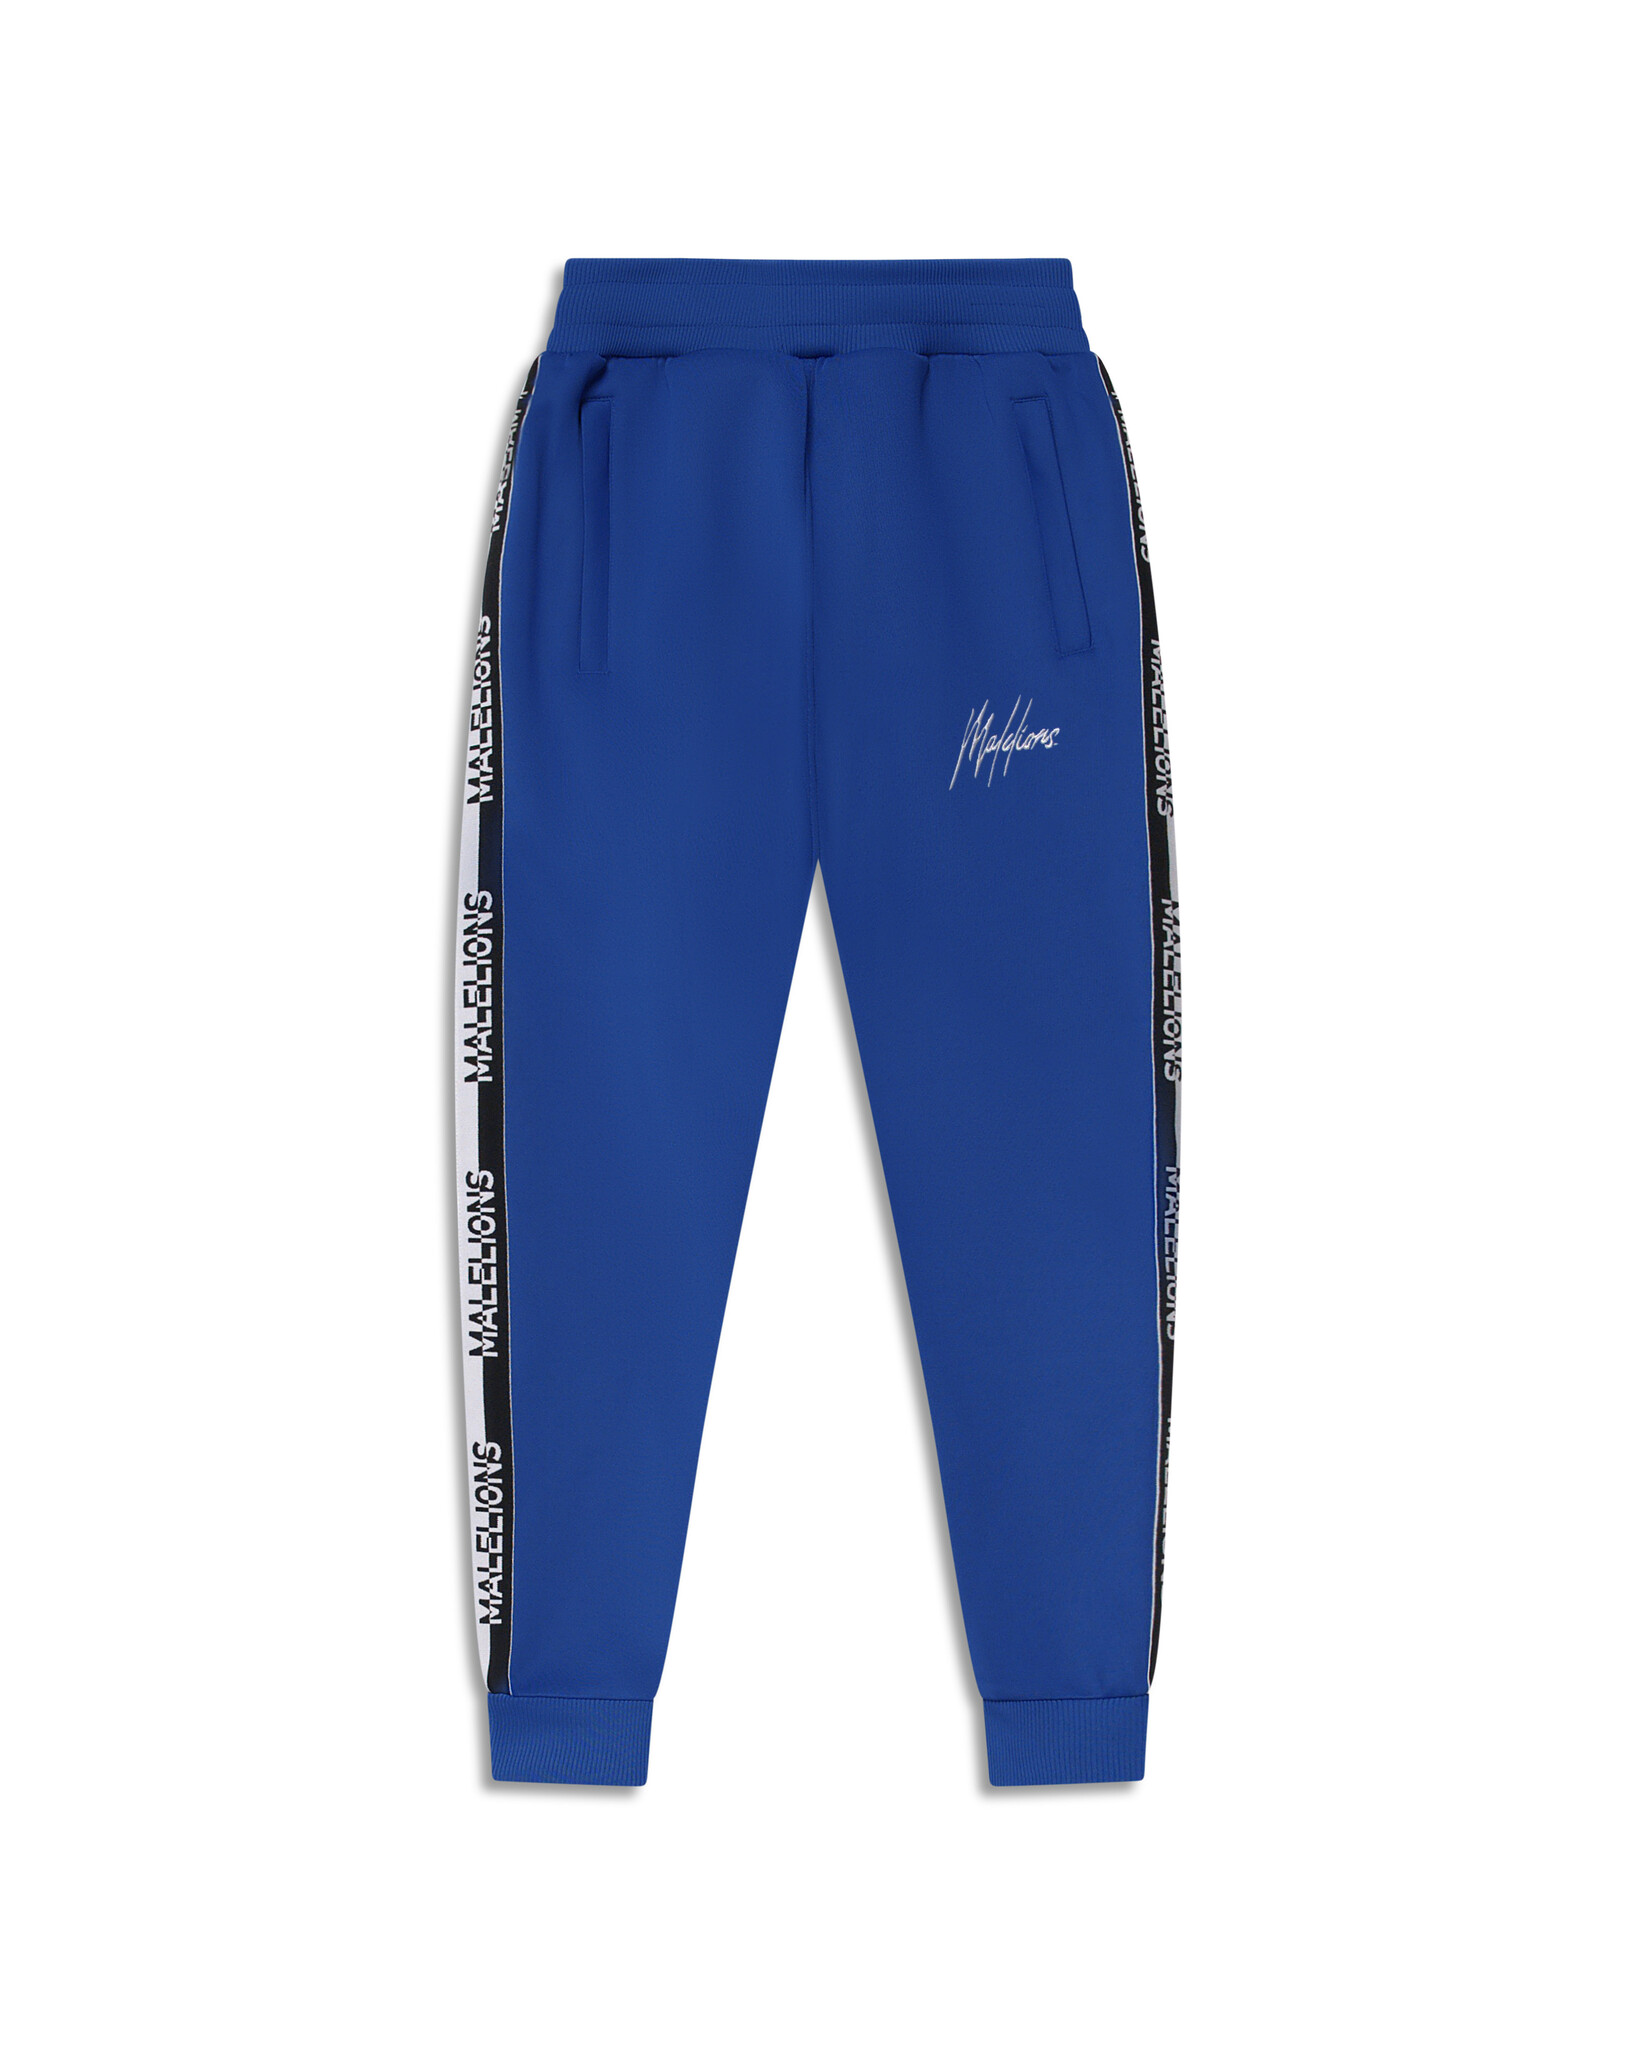 Malelions Junior Tape Trackpants - Cobalt Blue product